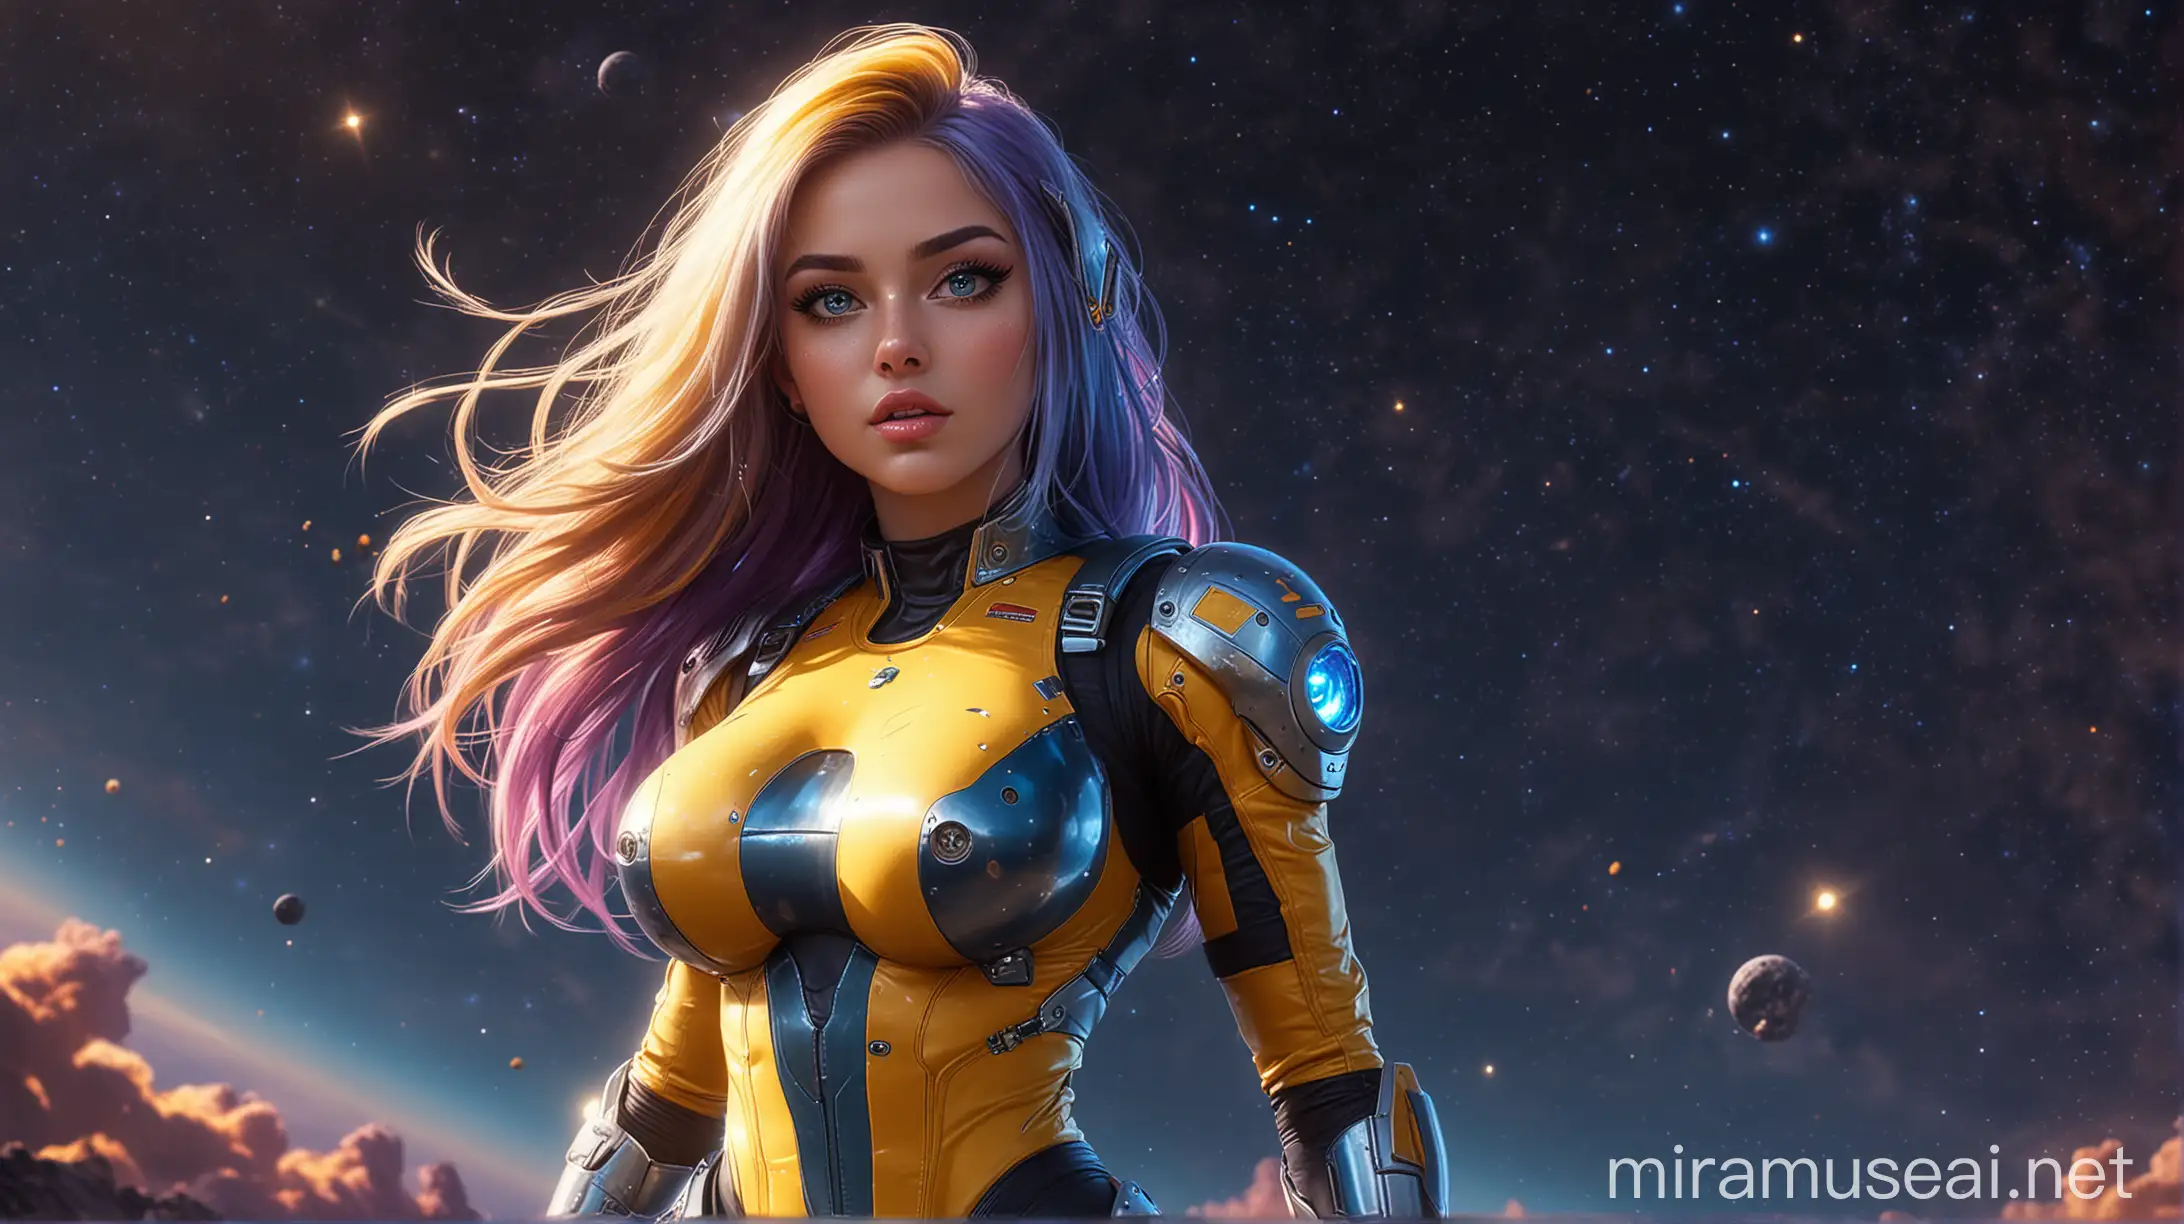 cartoon style, slim tall girl, futuristic weapon on the belt, sexy makeup, big eyes and fat lips, blue eyes, long hair, wild hair, colorful hair, fitness model, big boobs, wide hips, huge tits, tight spacesuit, high armored spacesuit, blue and yellow spacesuit, glowing spacesuit, night sky, stars, exploding planet in the sky